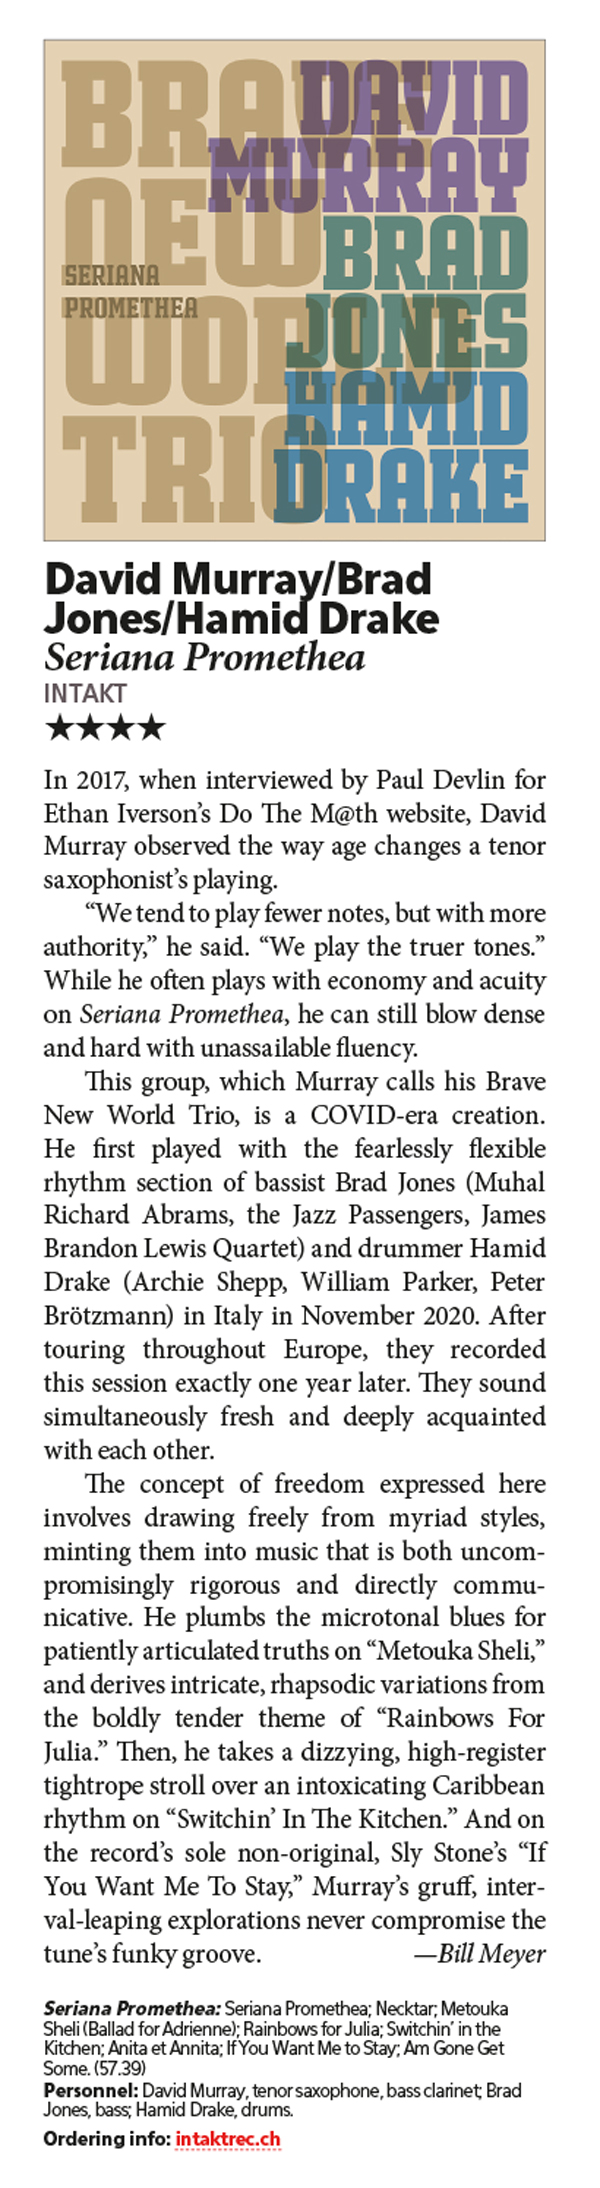 In 2017, when interviewed by Paul Devlin for
						Ethan Iverson’s Do The M@th website, David
						Murray observed the way age changes a tenor
						saxophonist’s playing.